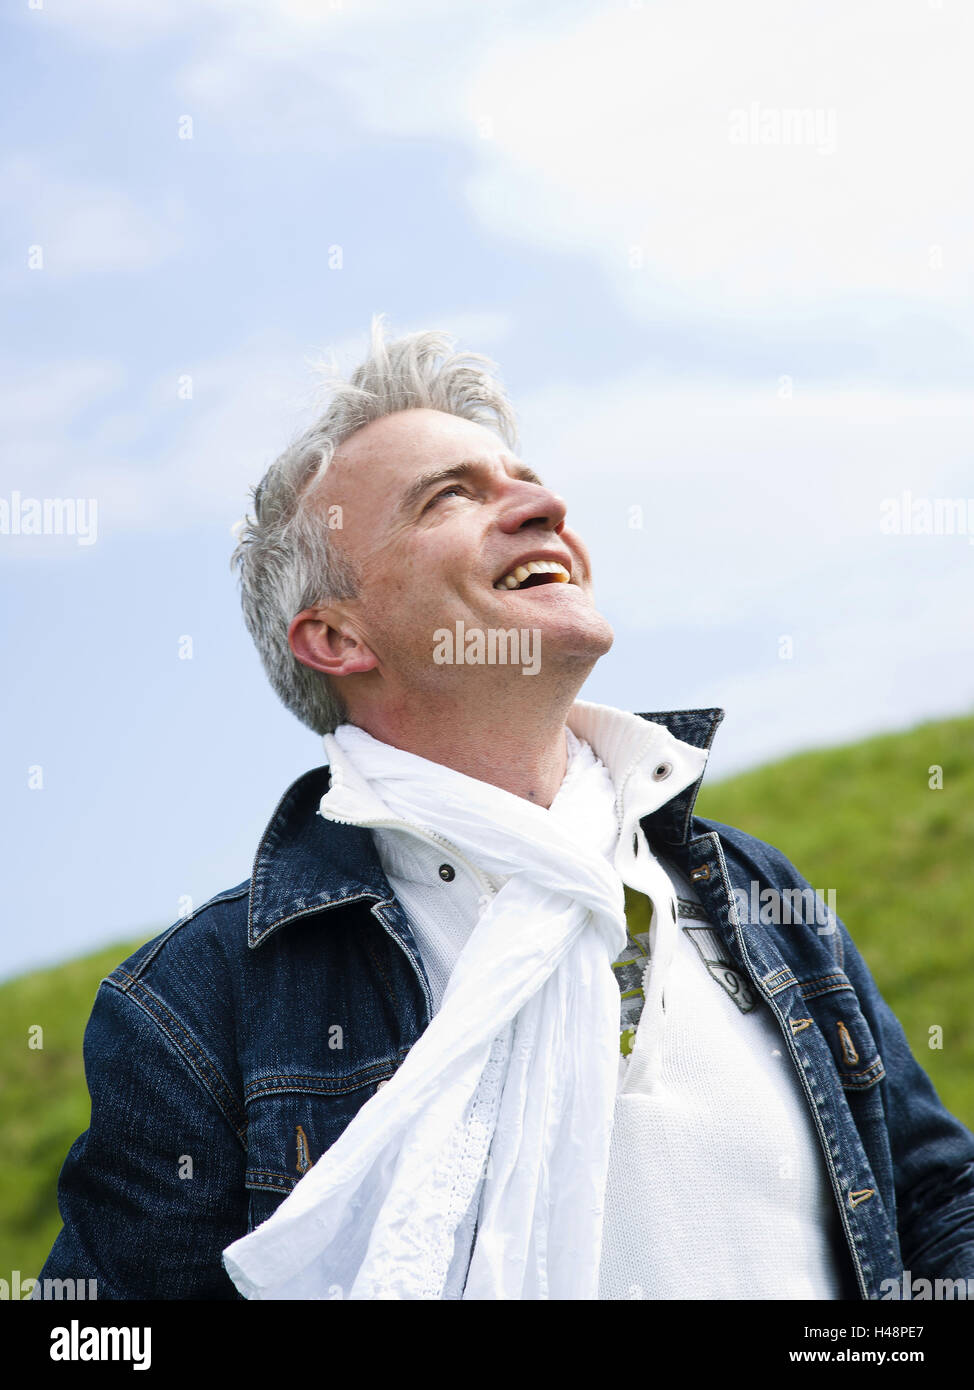 Man, view on top, smile, portrait, curled, Bestager, leisure time, nature, person, denim jacket, scarf, in a good mood, Stock Photo